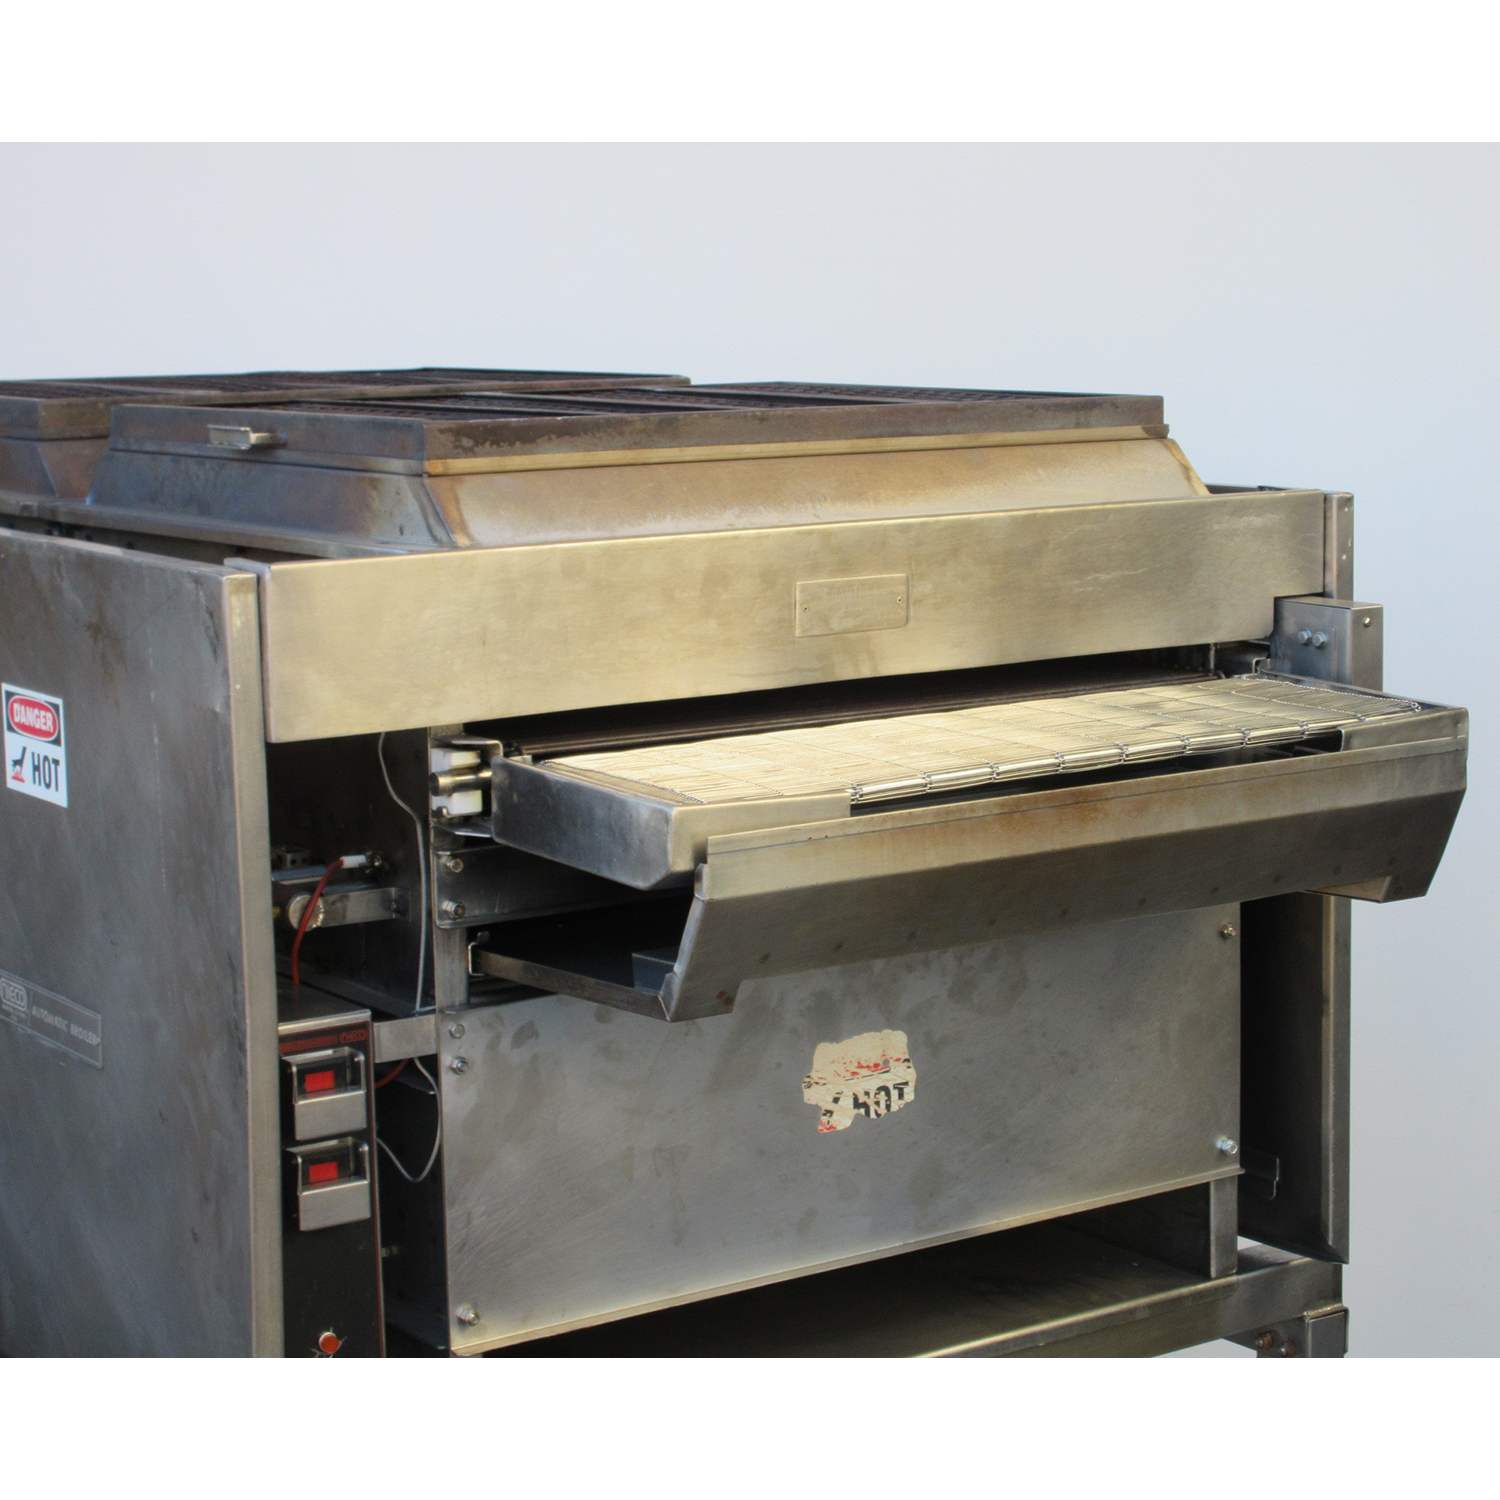 Nieco N2500 Automatic Conveyor Broiler, Used Excellent Condition image 1